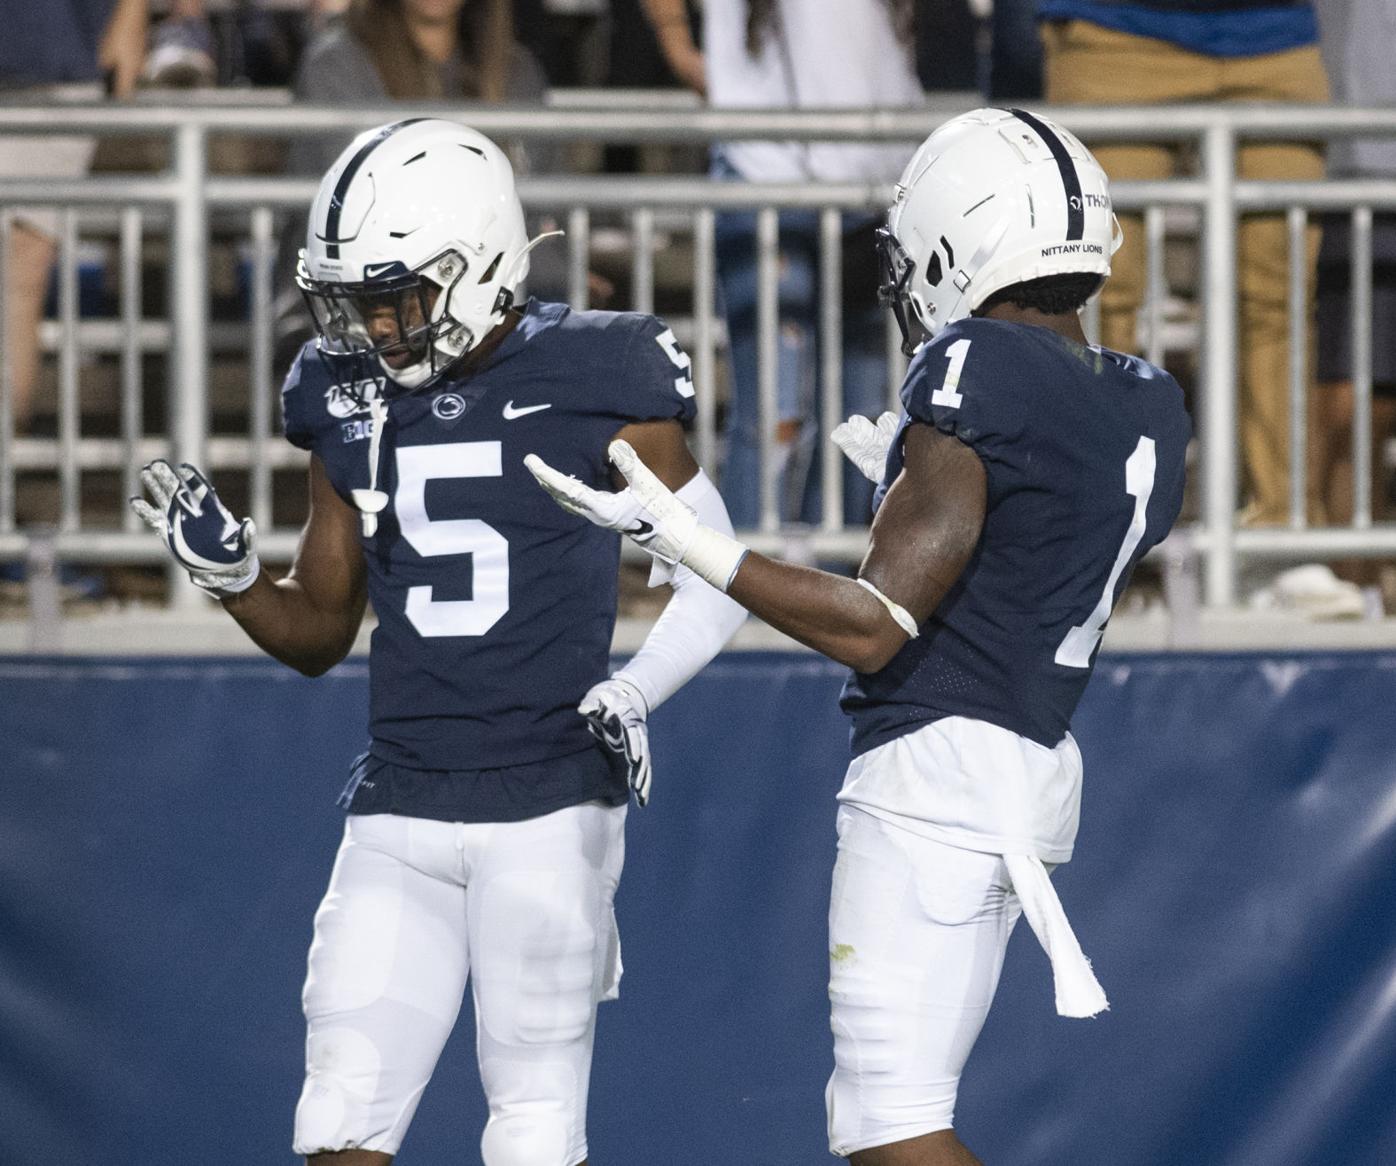 Fueled by family's sacrifices, Jahan Dotson leads Penn State to win